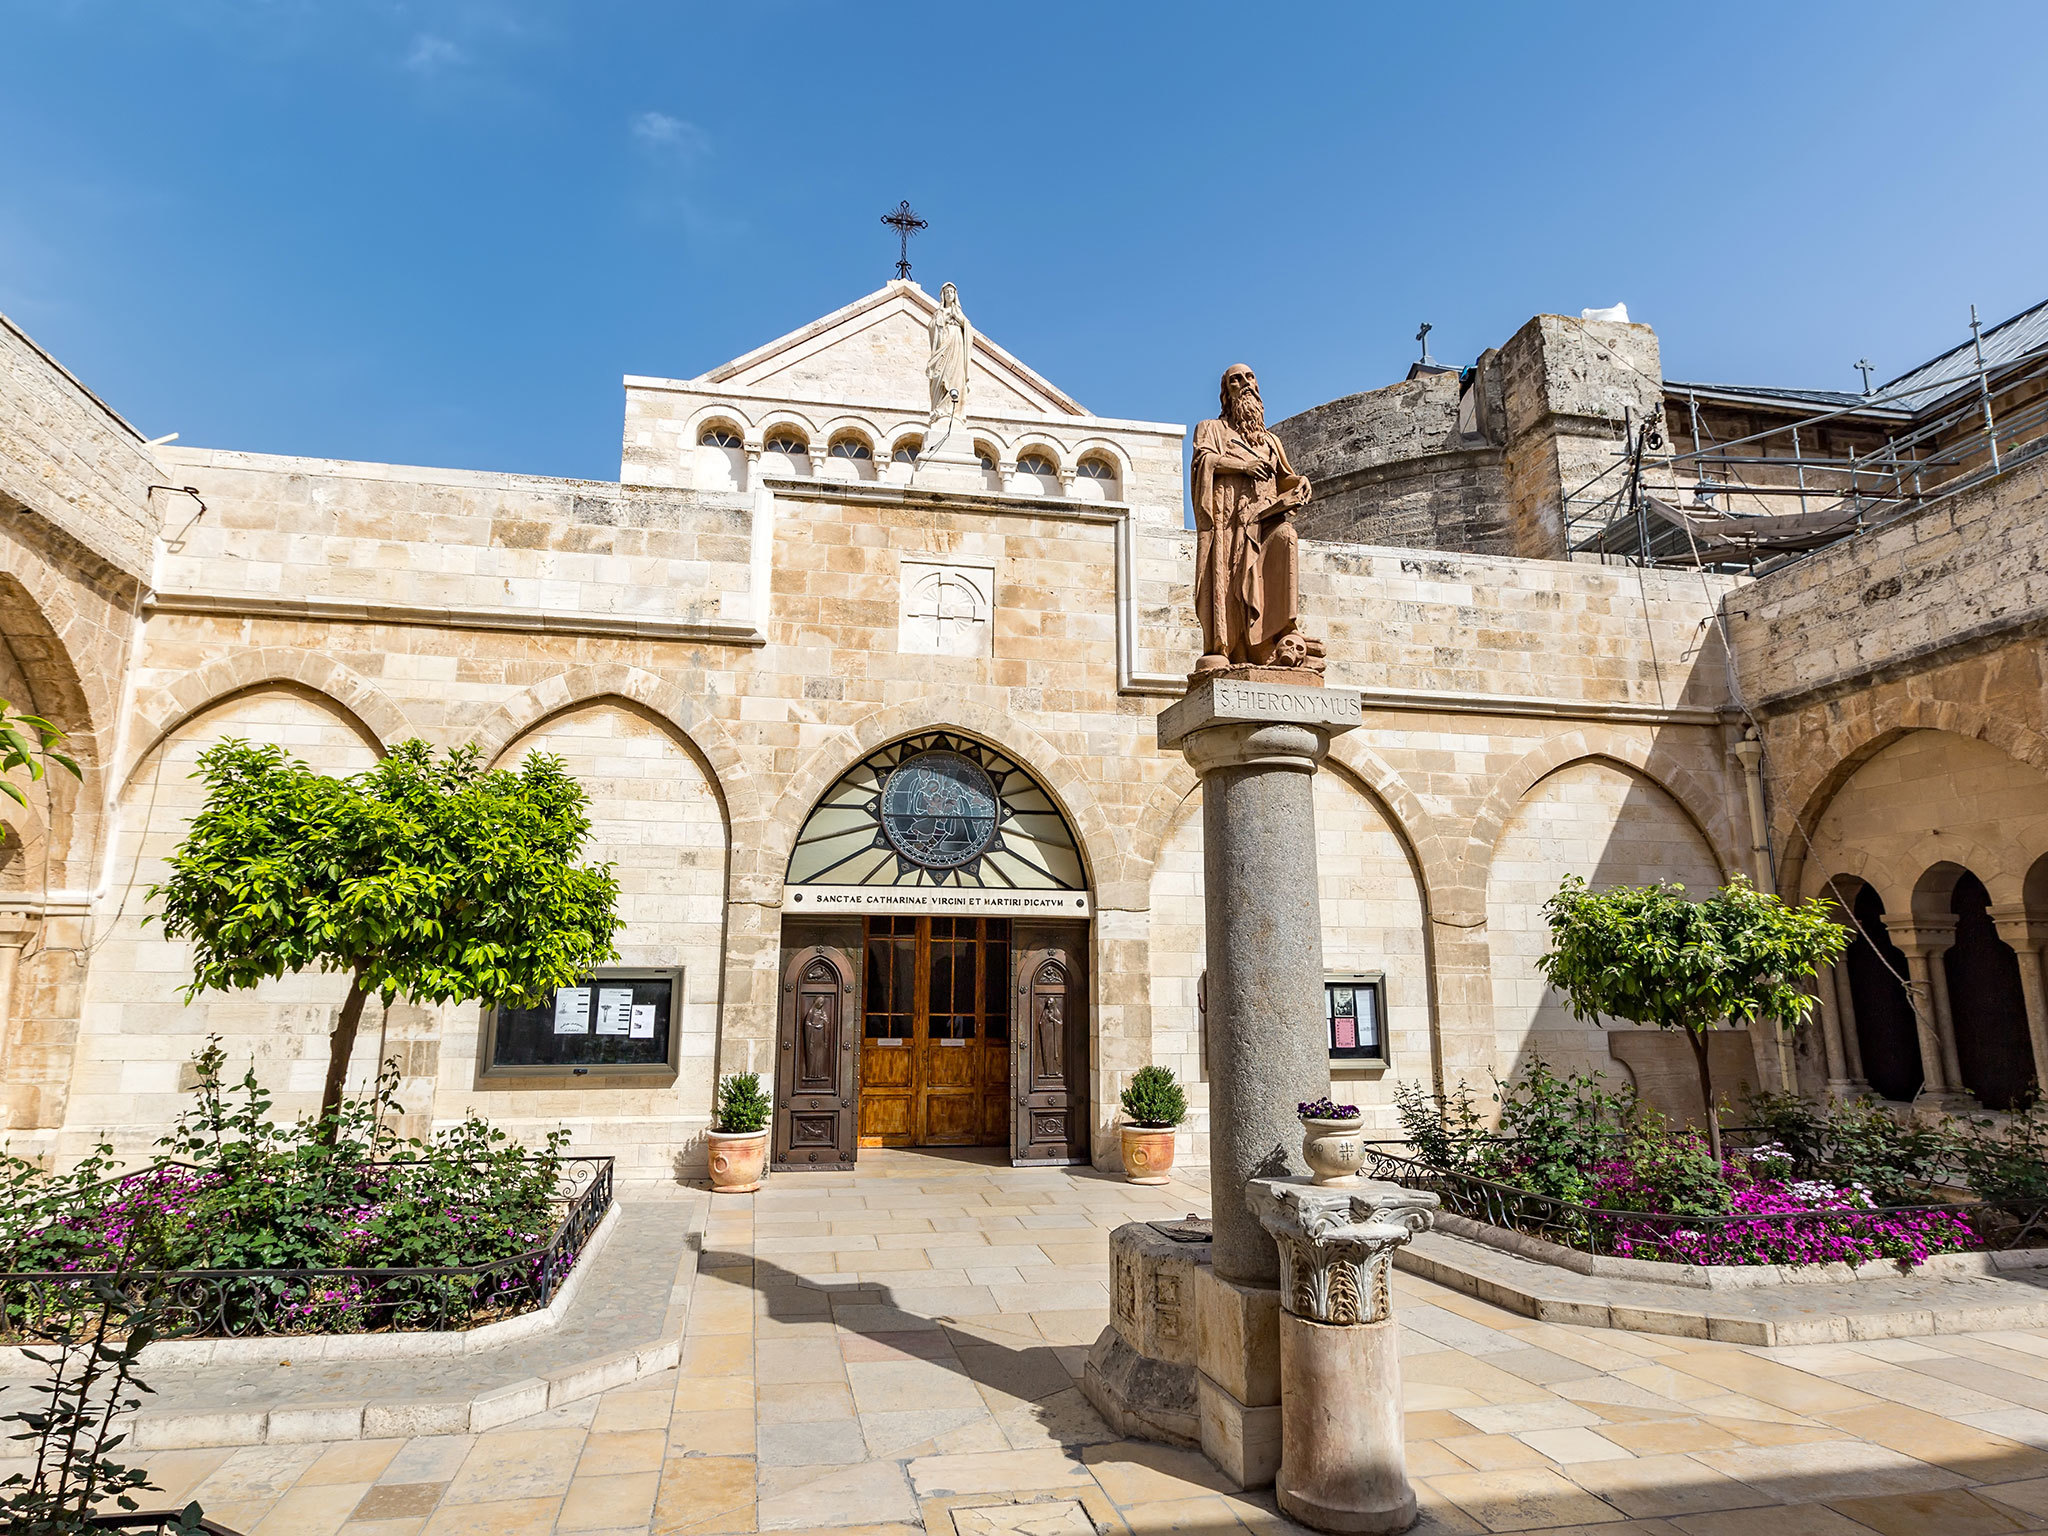 Church of the Nativity | Attractions in Bethlehem, Israel